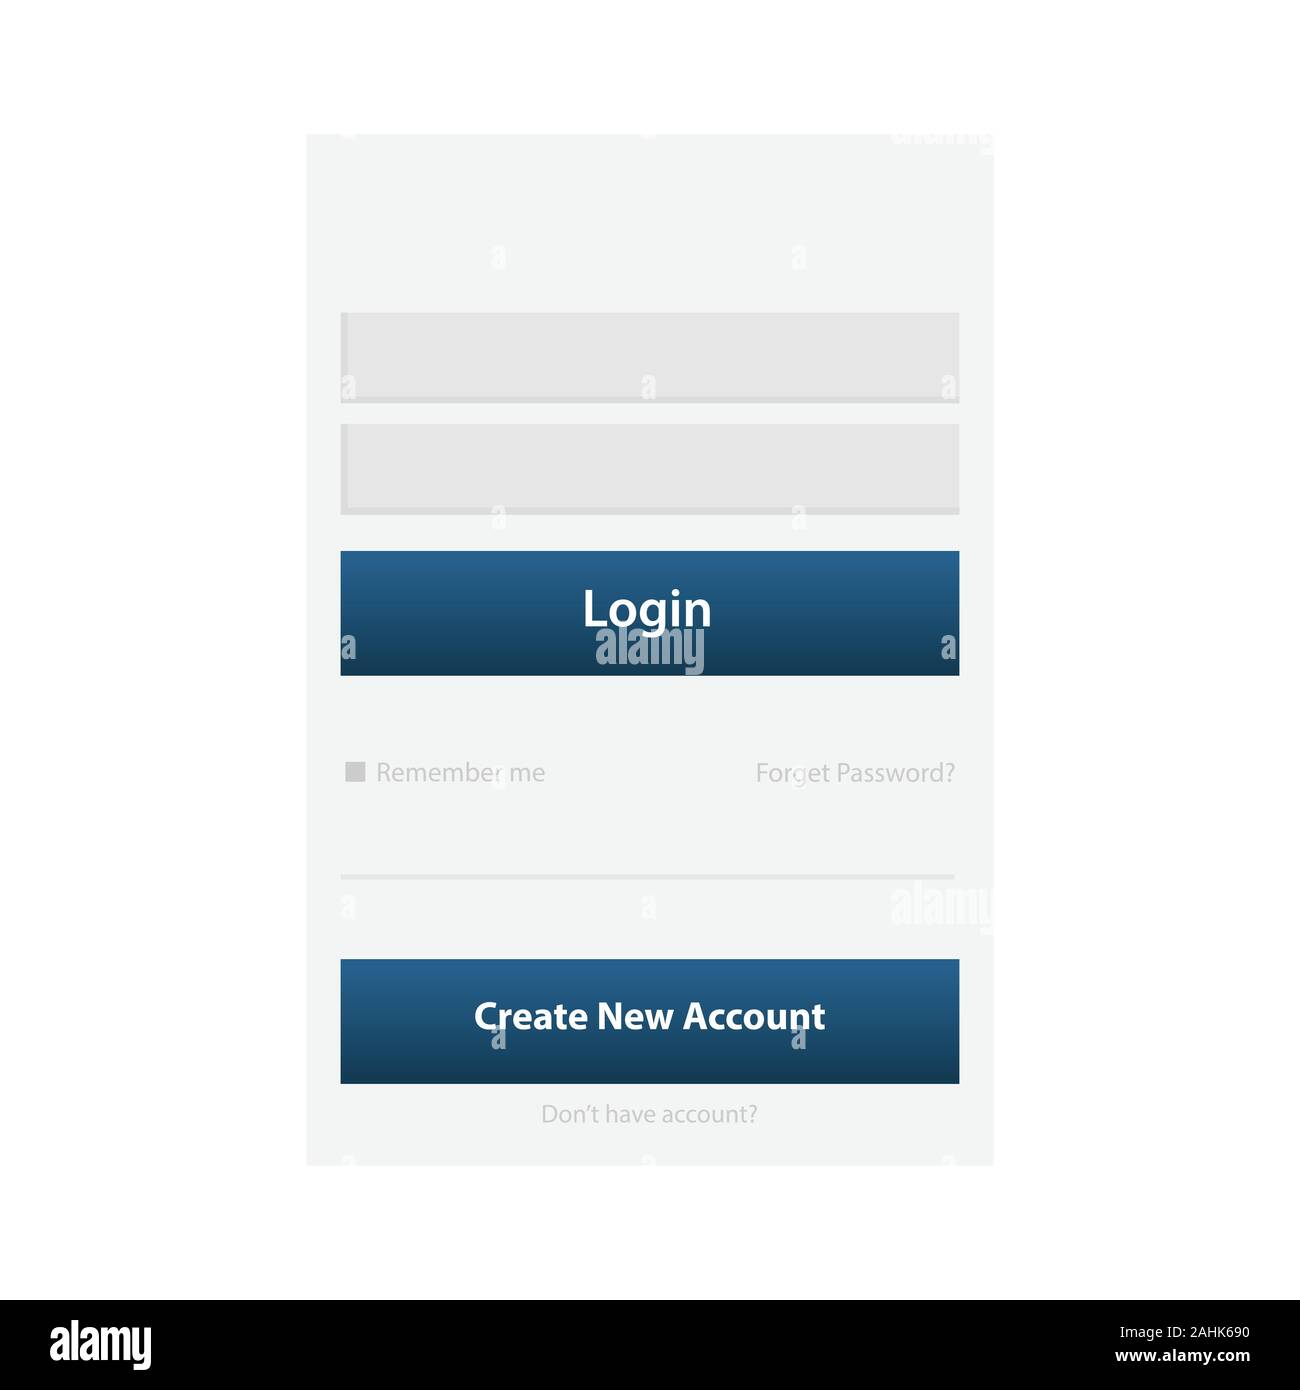 Login screen and Sign In form template for mobile app or website design. UI, UX, user interface kit, smartphone application design. Flat and minimal s Stock Vector